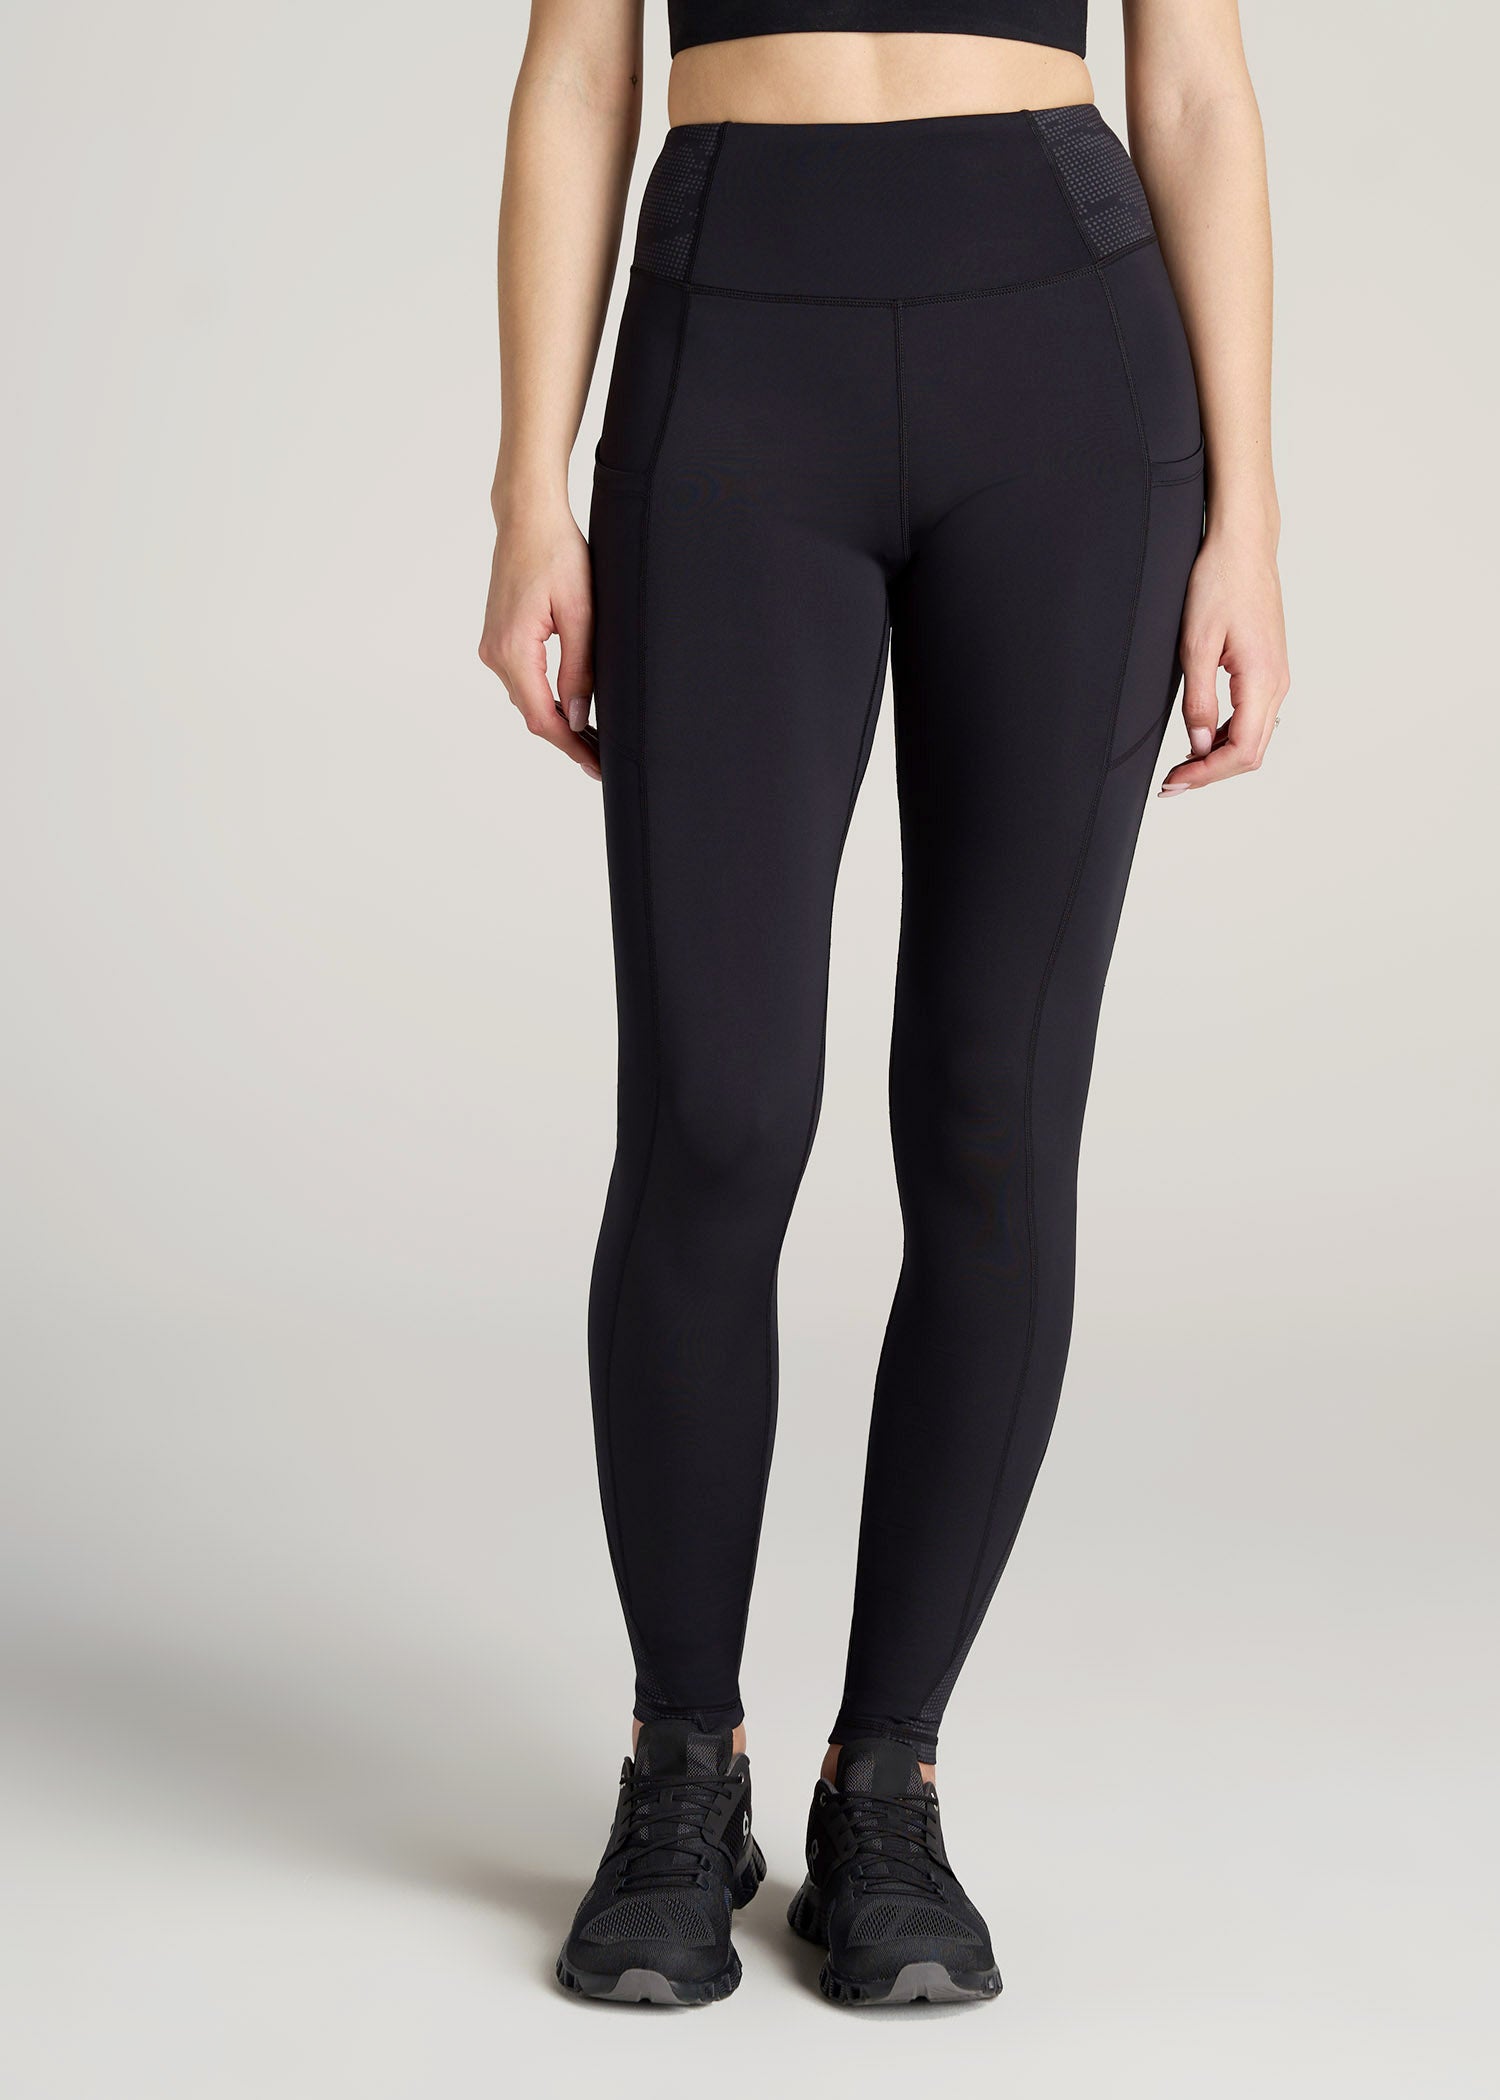 anyone have any idea on the style of these leggings? they look soo cozy : r/ lululemon